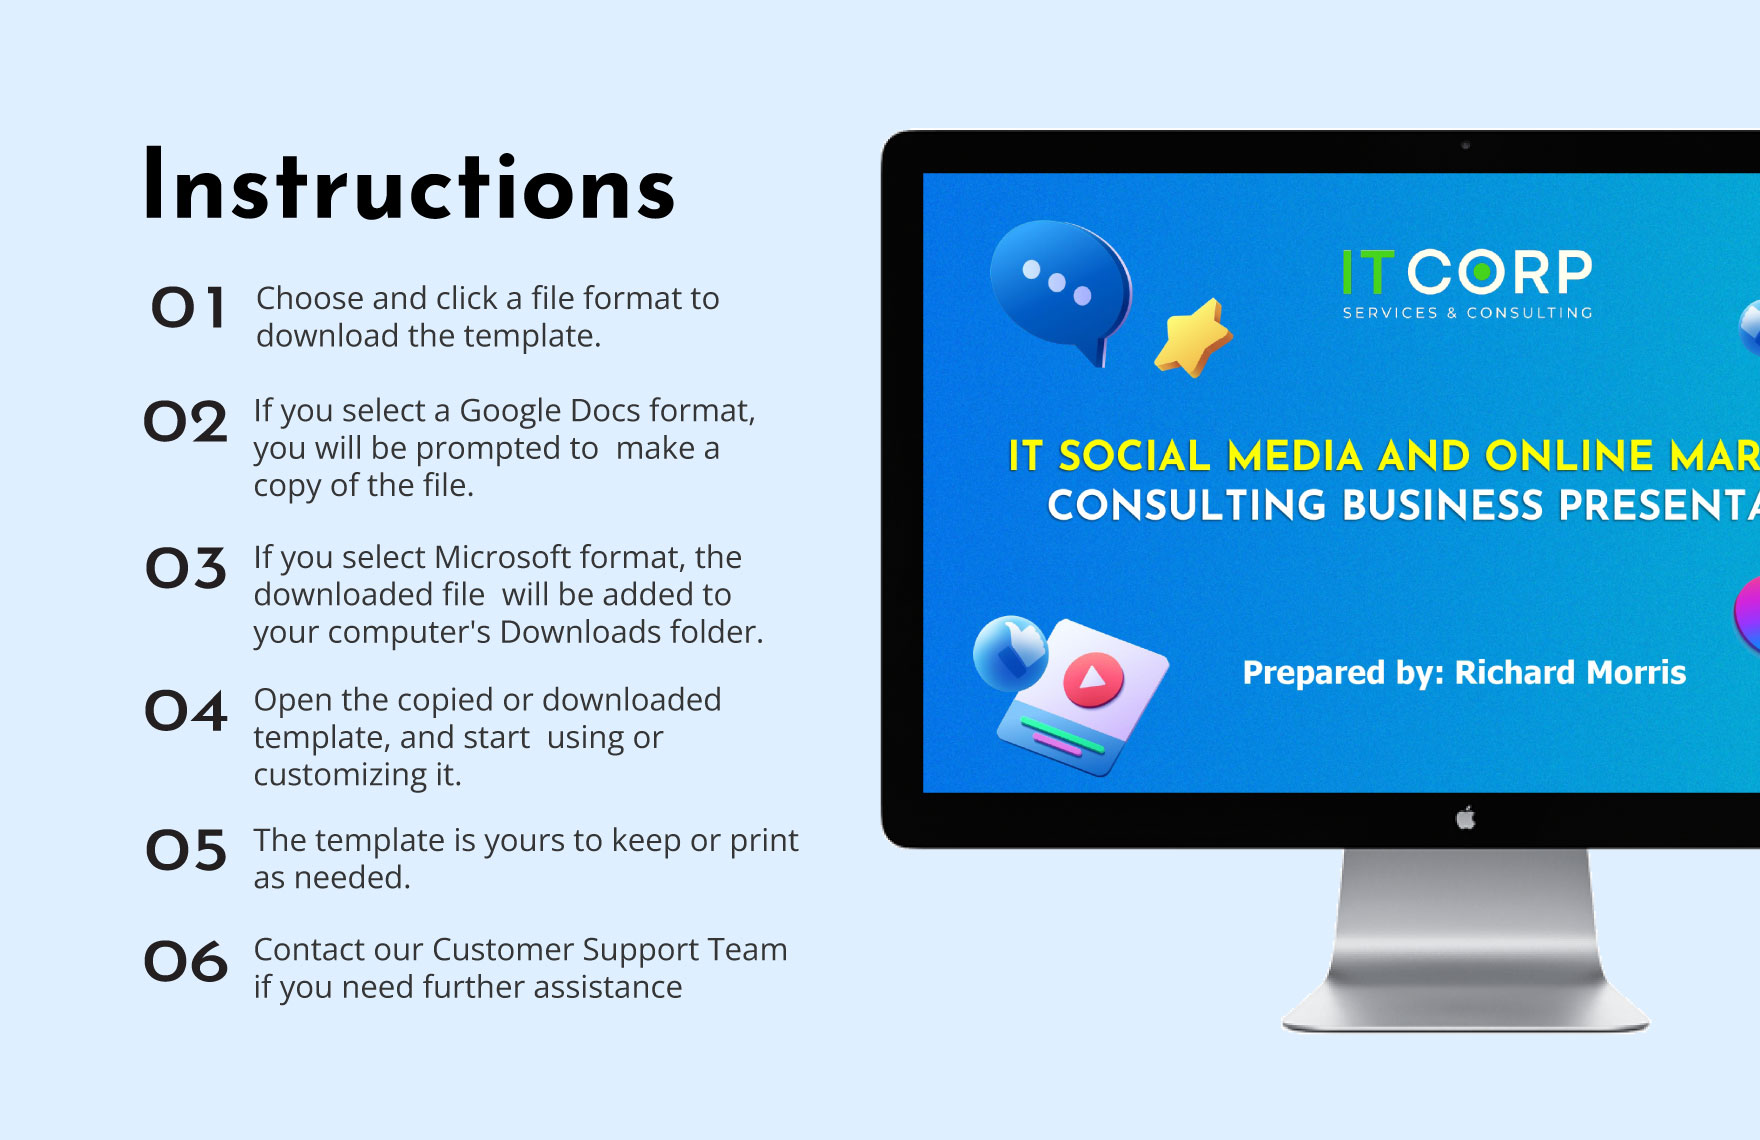 IT Social Media & Online Marketing Consulting Business Presentation Template